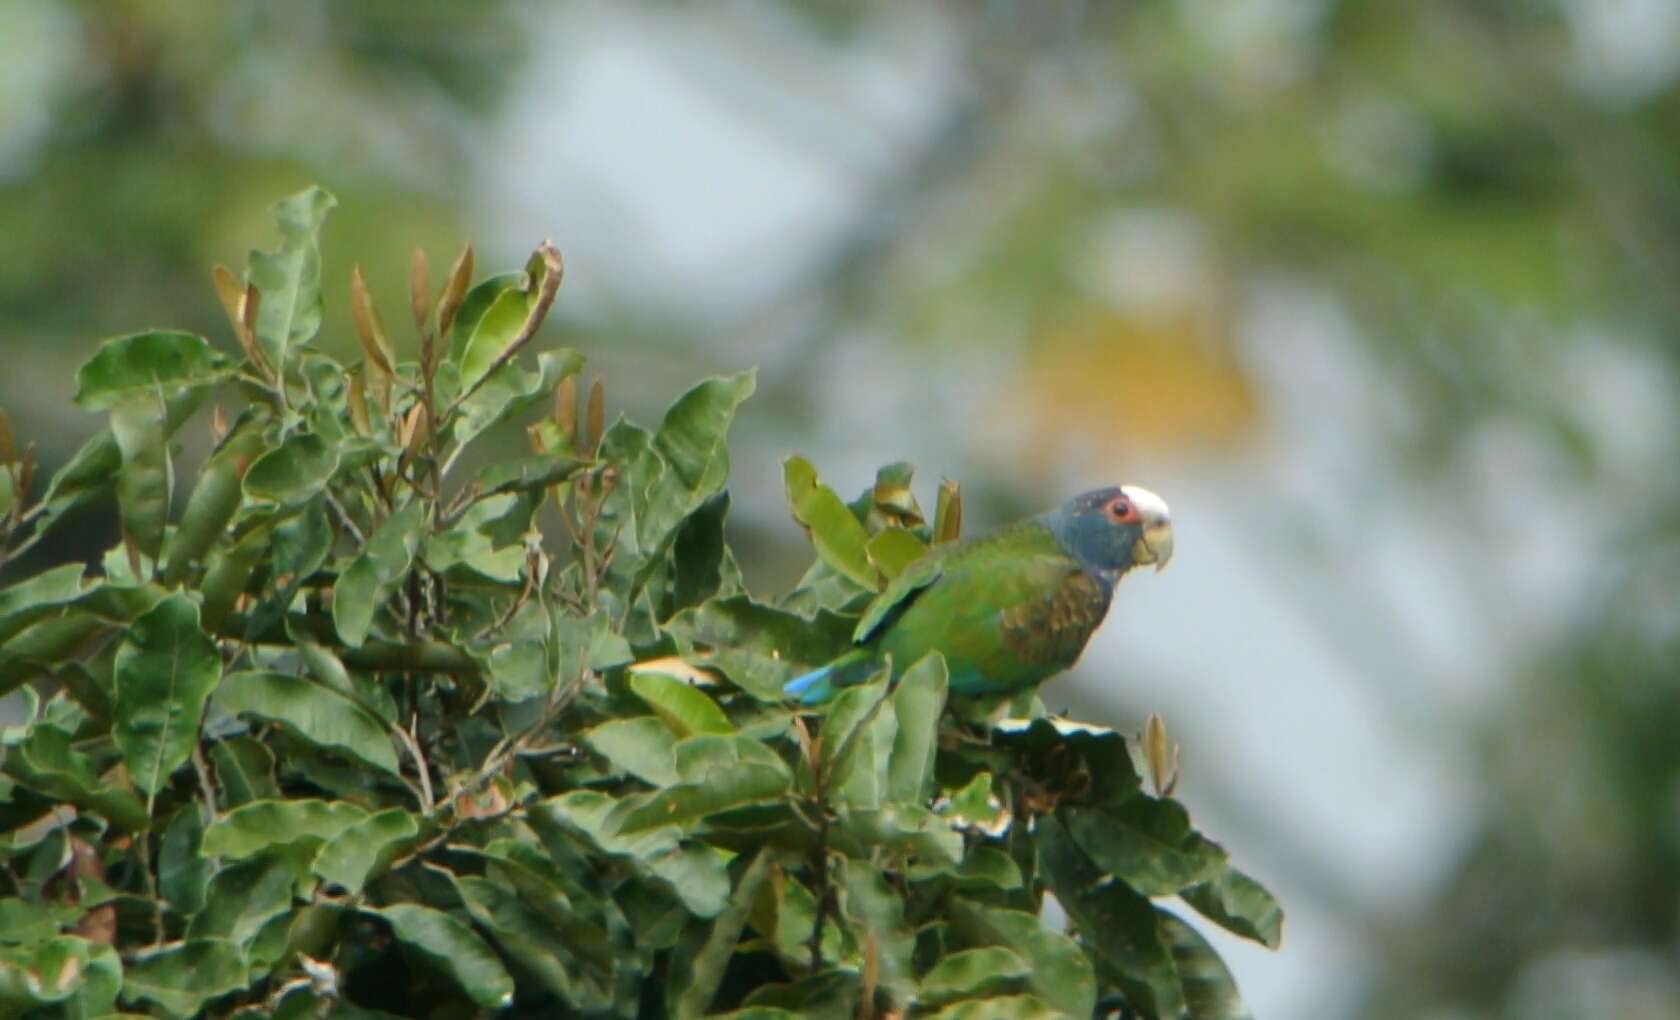 Image of White-crowned Parrot